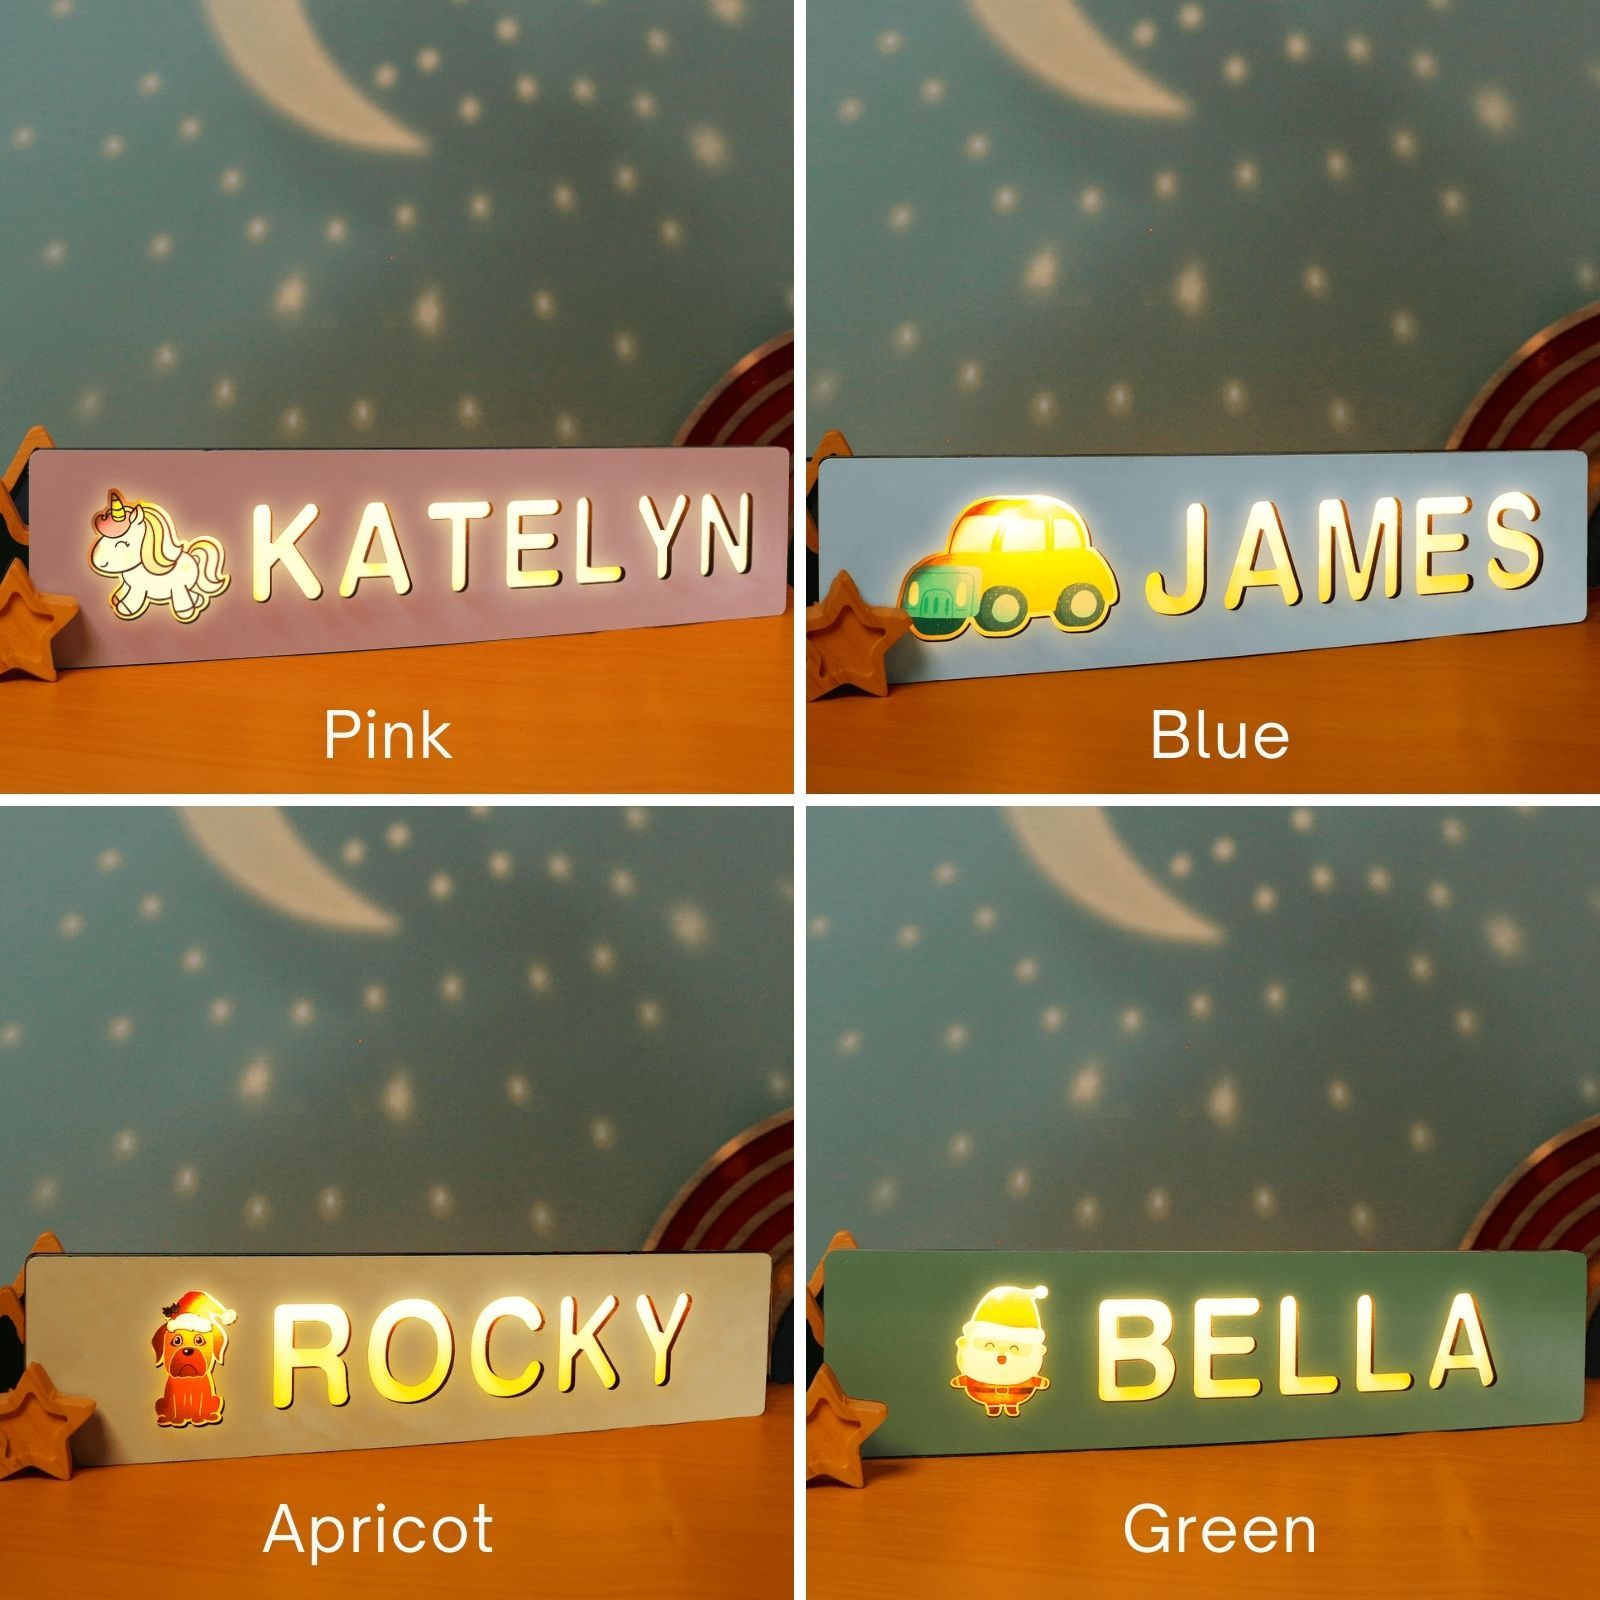 Personalized wooden letter Night Light, cute led letter light up Engraved Hollow out design, Custom Name text Letter Lamp Decor Gift for Kids Couples Friends Girlfriend Boyfriend - uniqicon